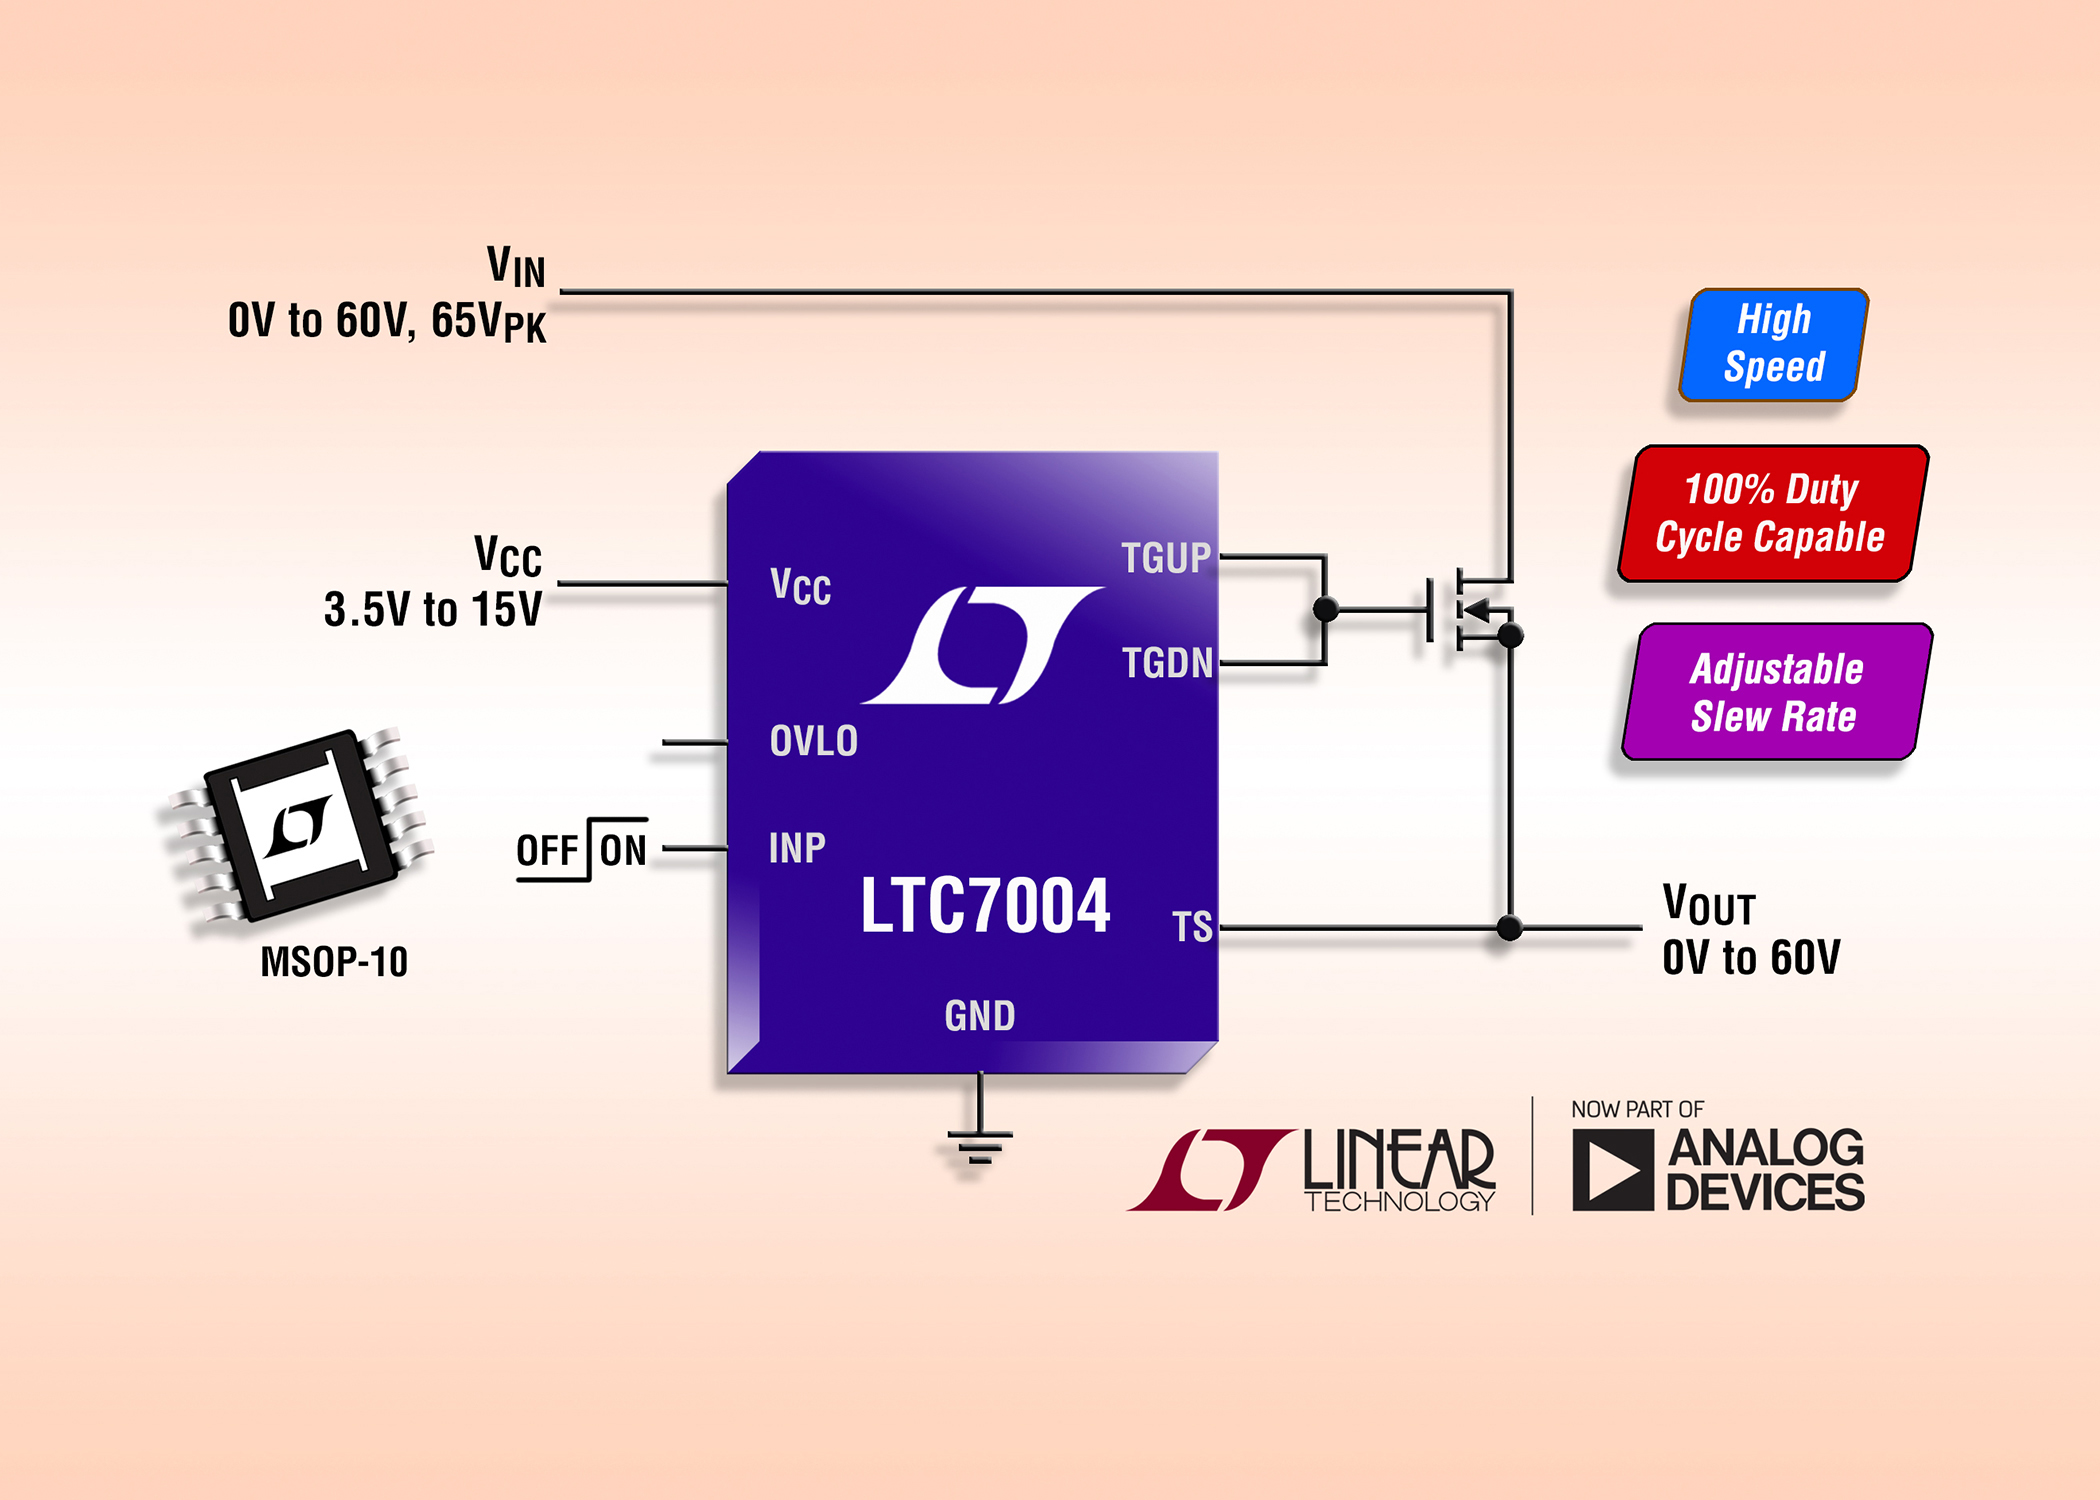 Fast 60V High Side N-Channel MOSFET Driver Provides 100% Duty Cycle Capability